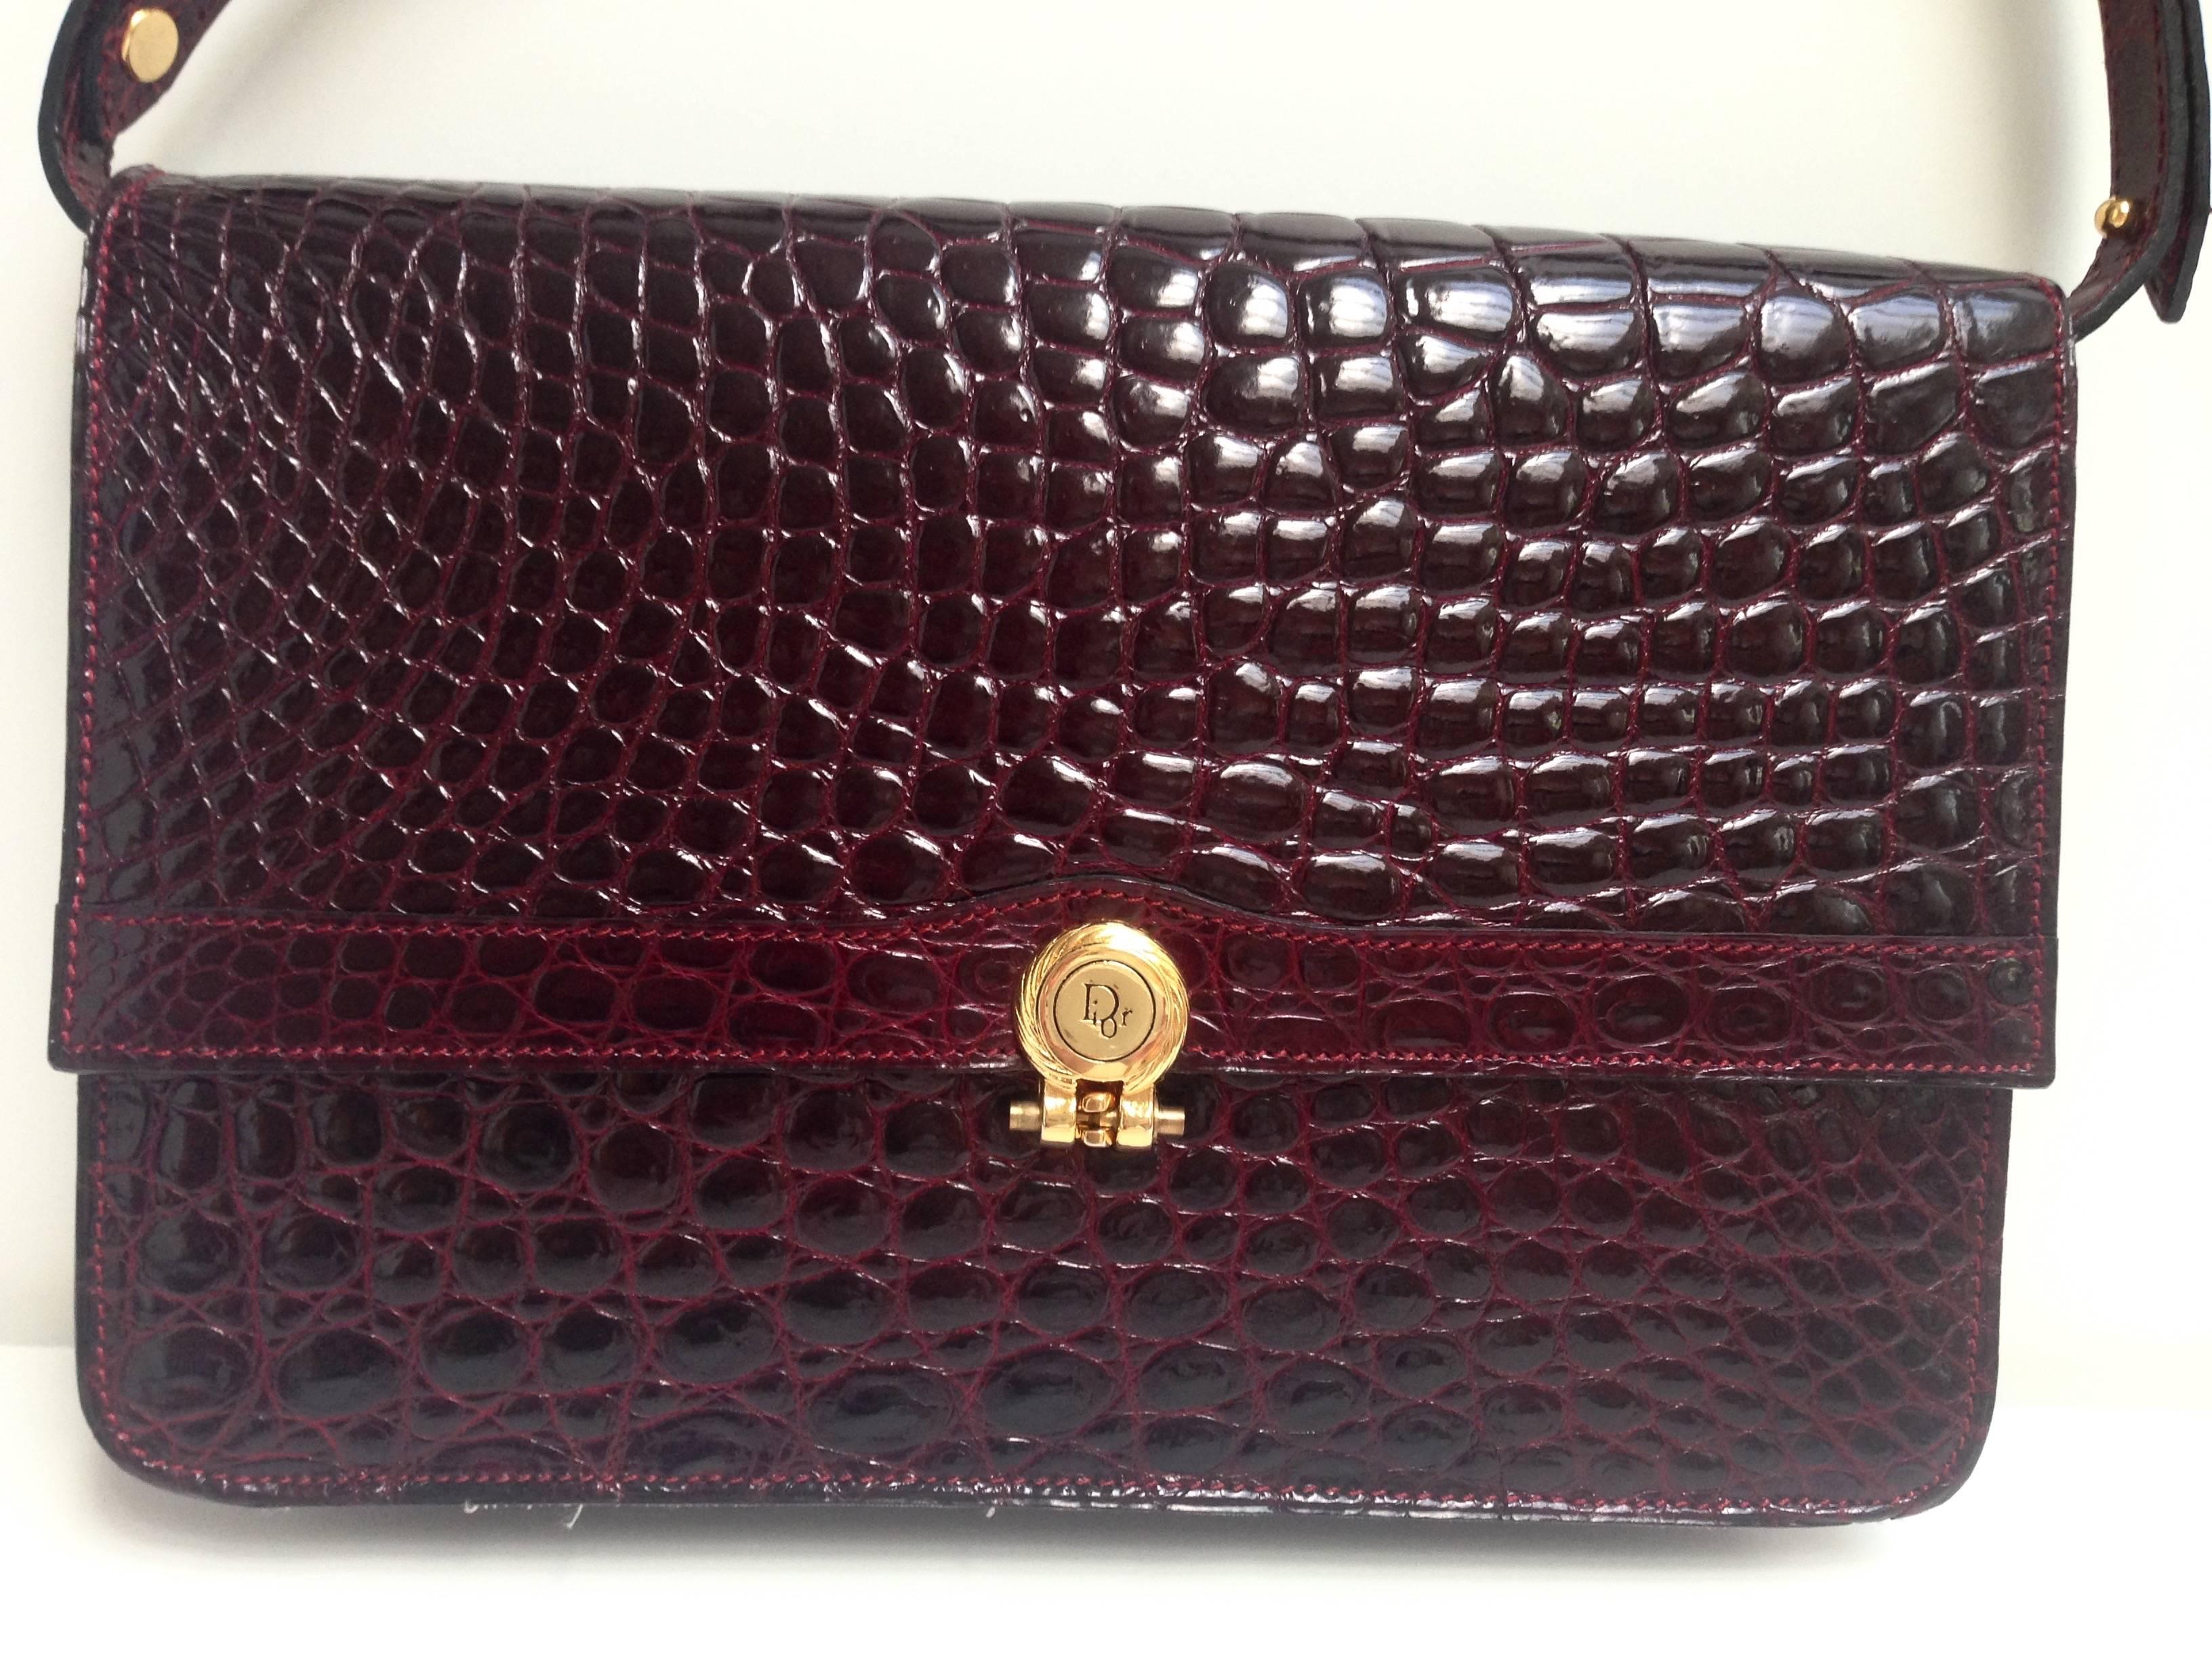 Gorgeous burgundy crocodile purse from Christian Dior from the 1980s.
Single flap opening. Fully lined lether interior, one inside pocket with zipper. Gold hardware. Adjustable strap from 7